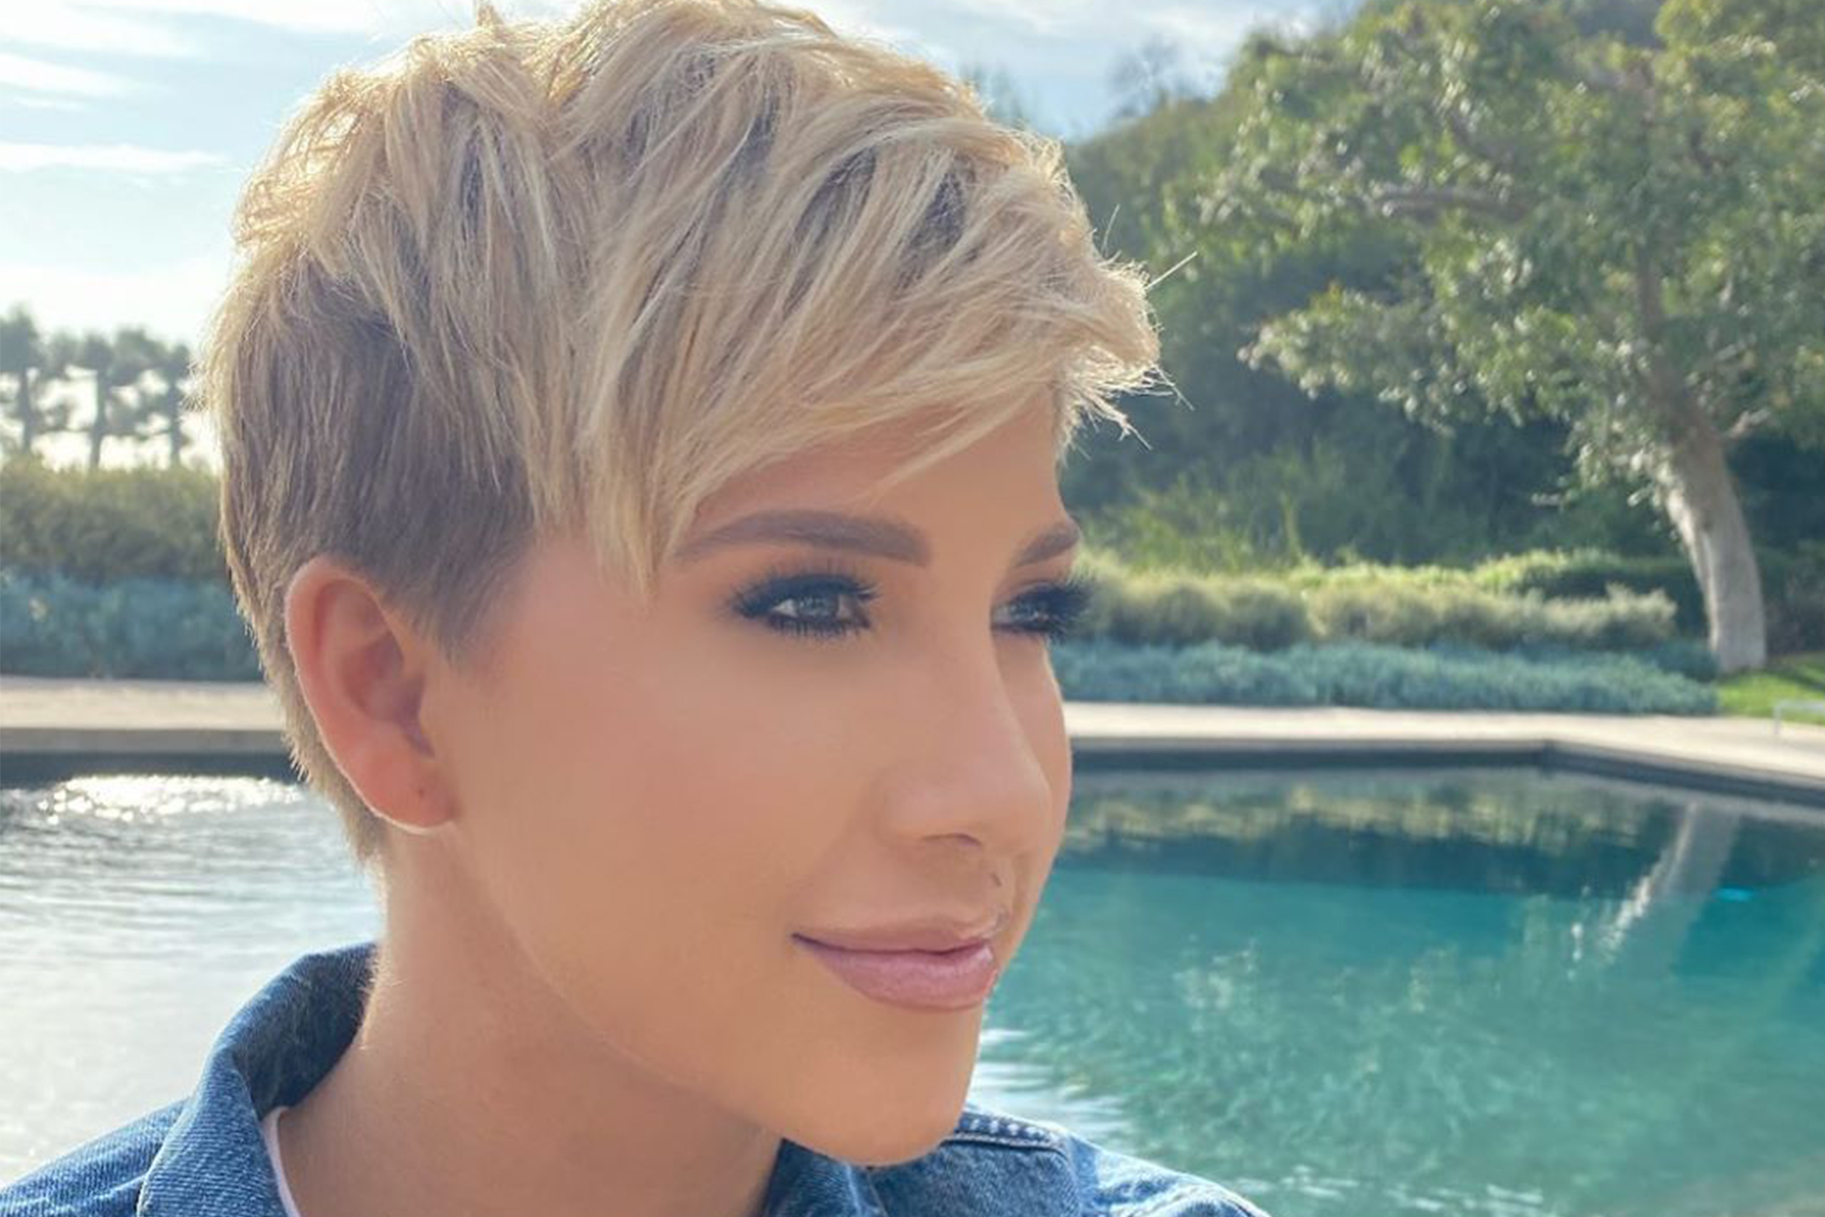 Savannah Chrisley’s Nose Job – Before and After Images